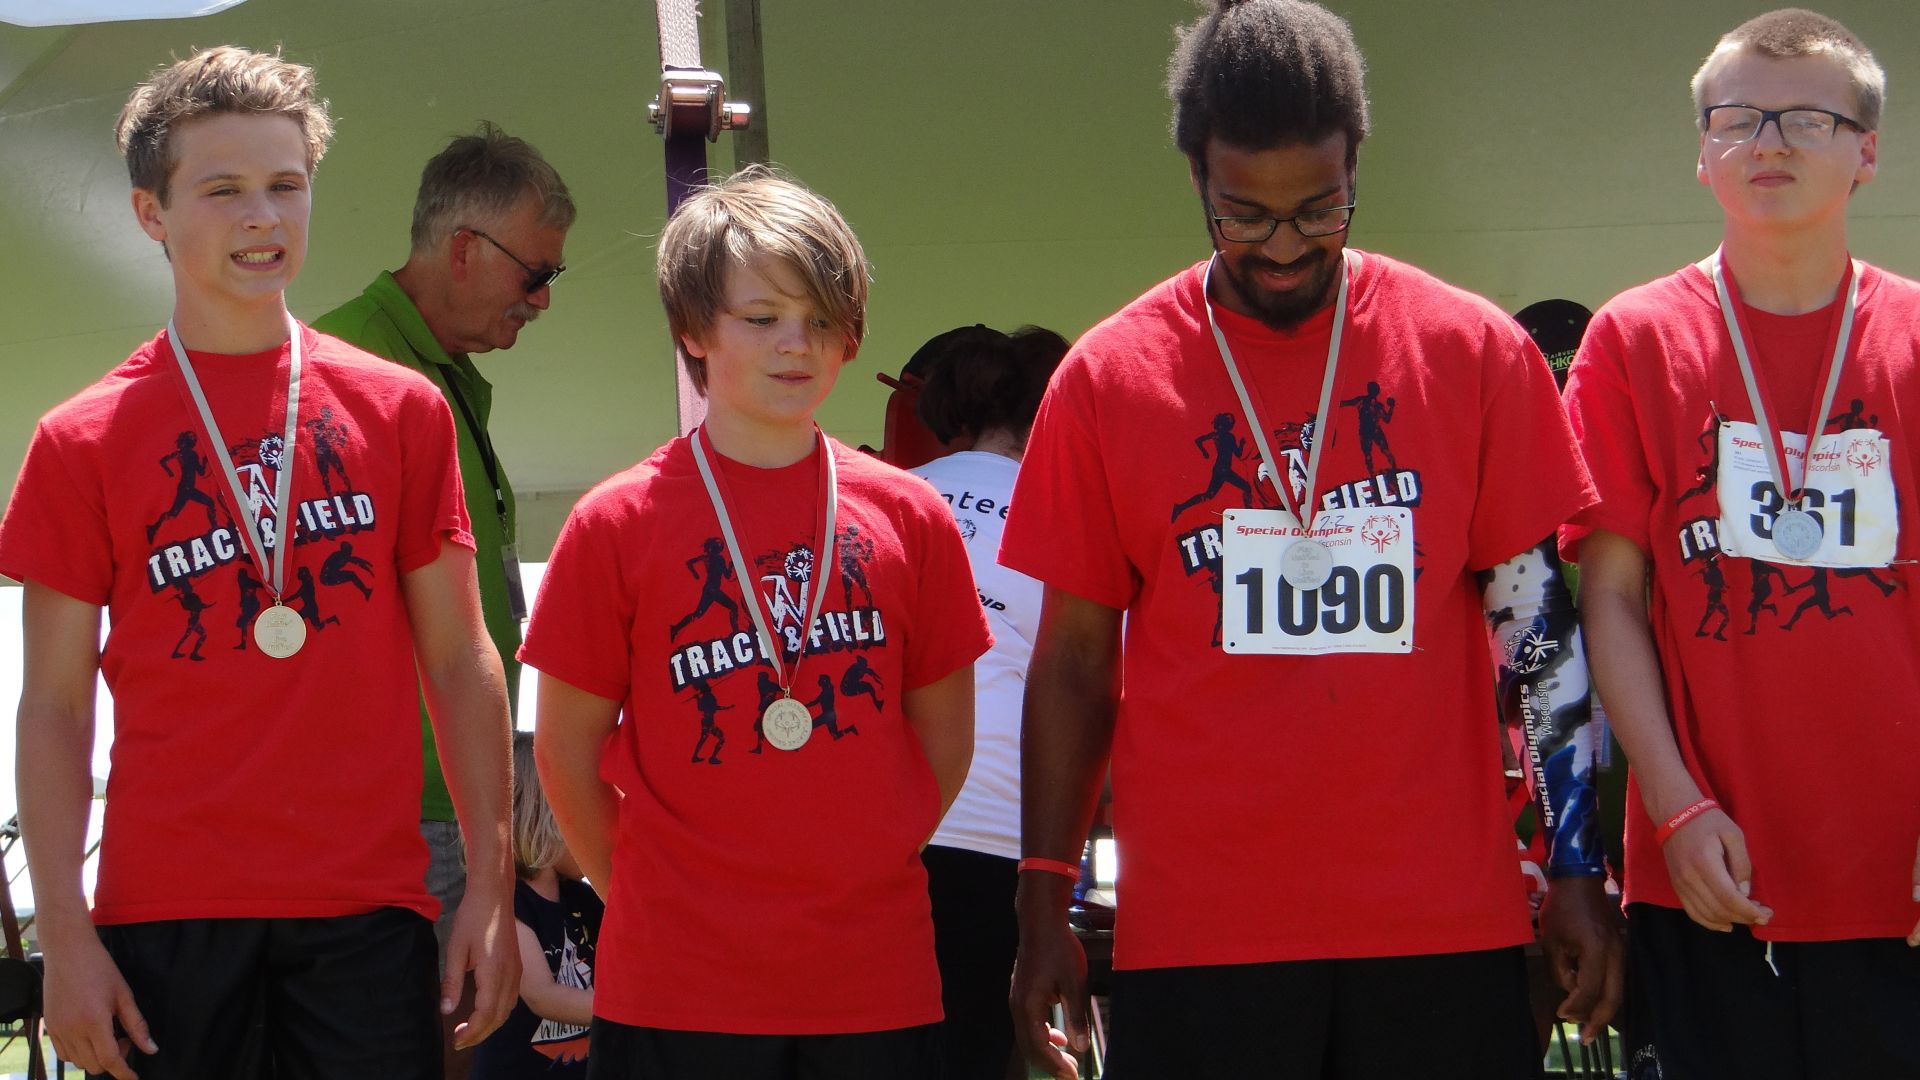 Kendrick (1090) on the medal stand after competing in Unified relay at the 2017 State Summer Games